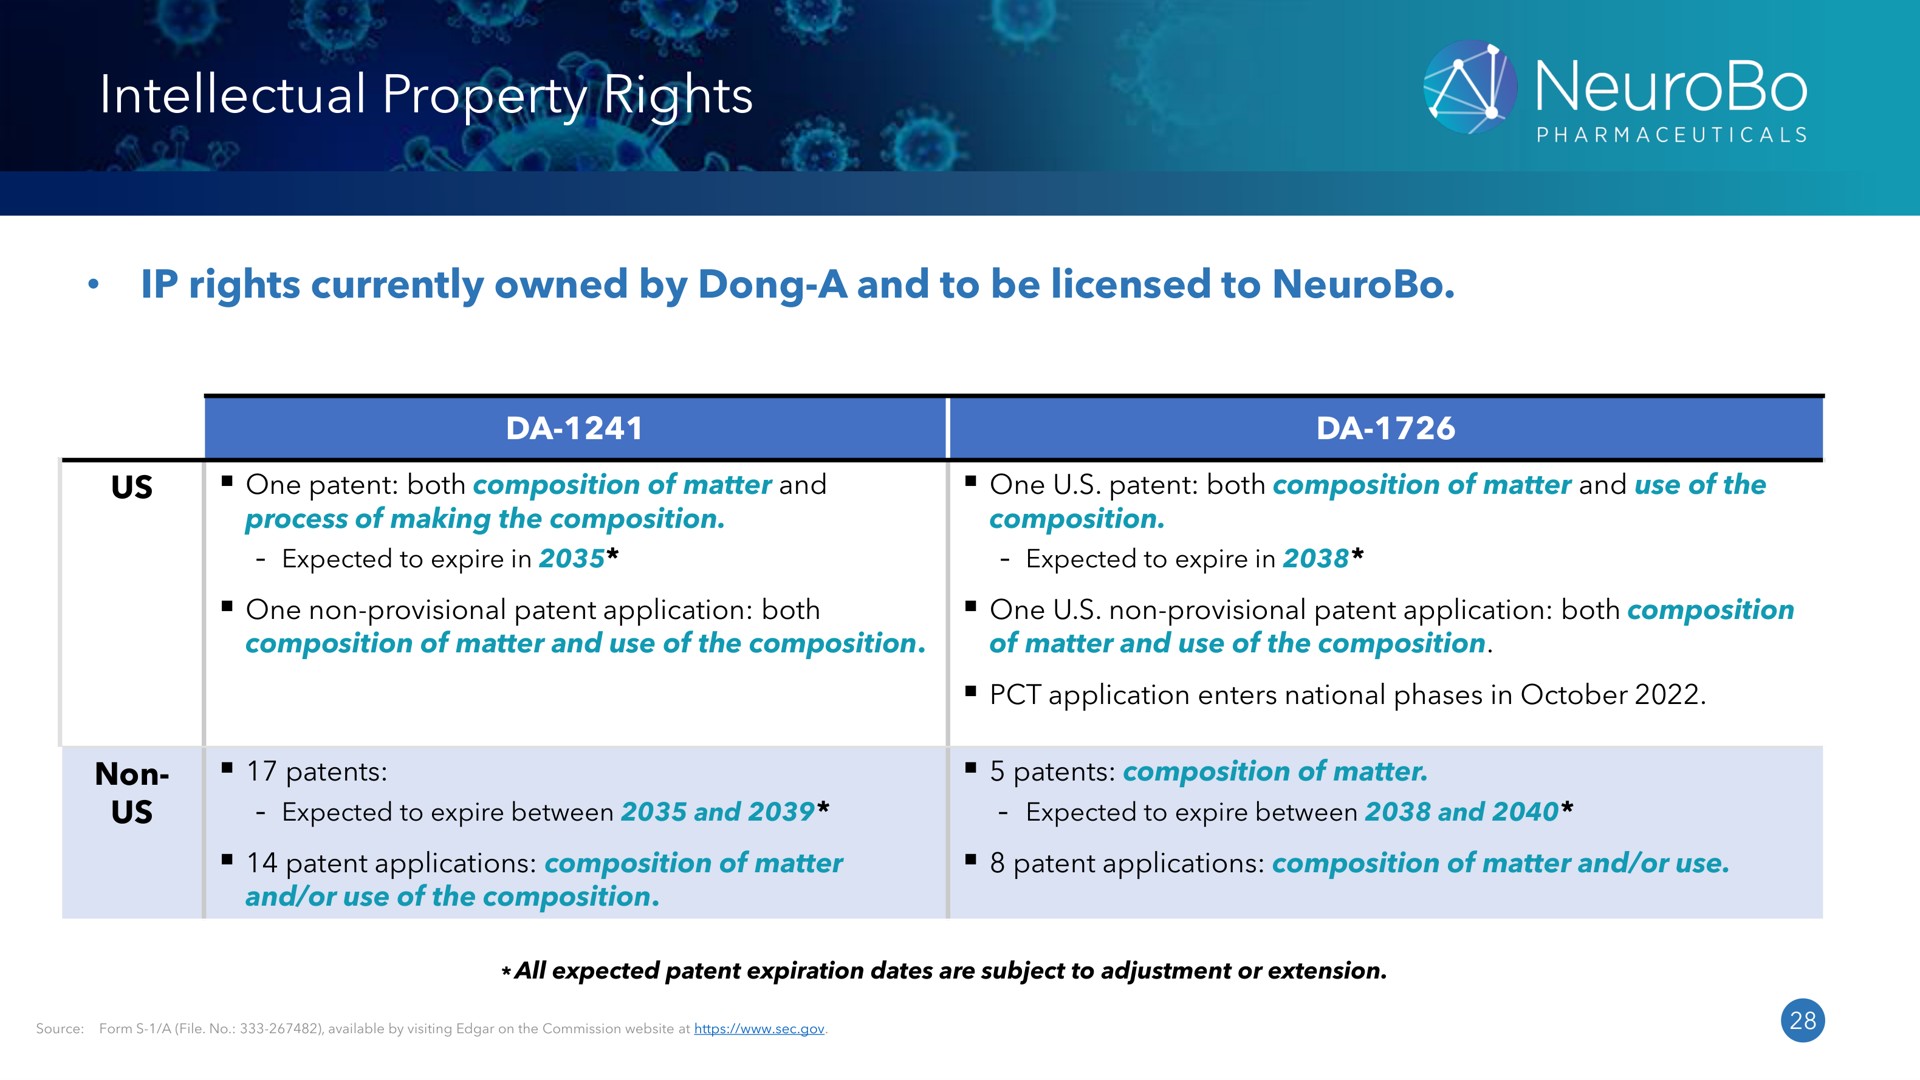 intellectual property rights spy | NeuroBo Pharmaceuticals